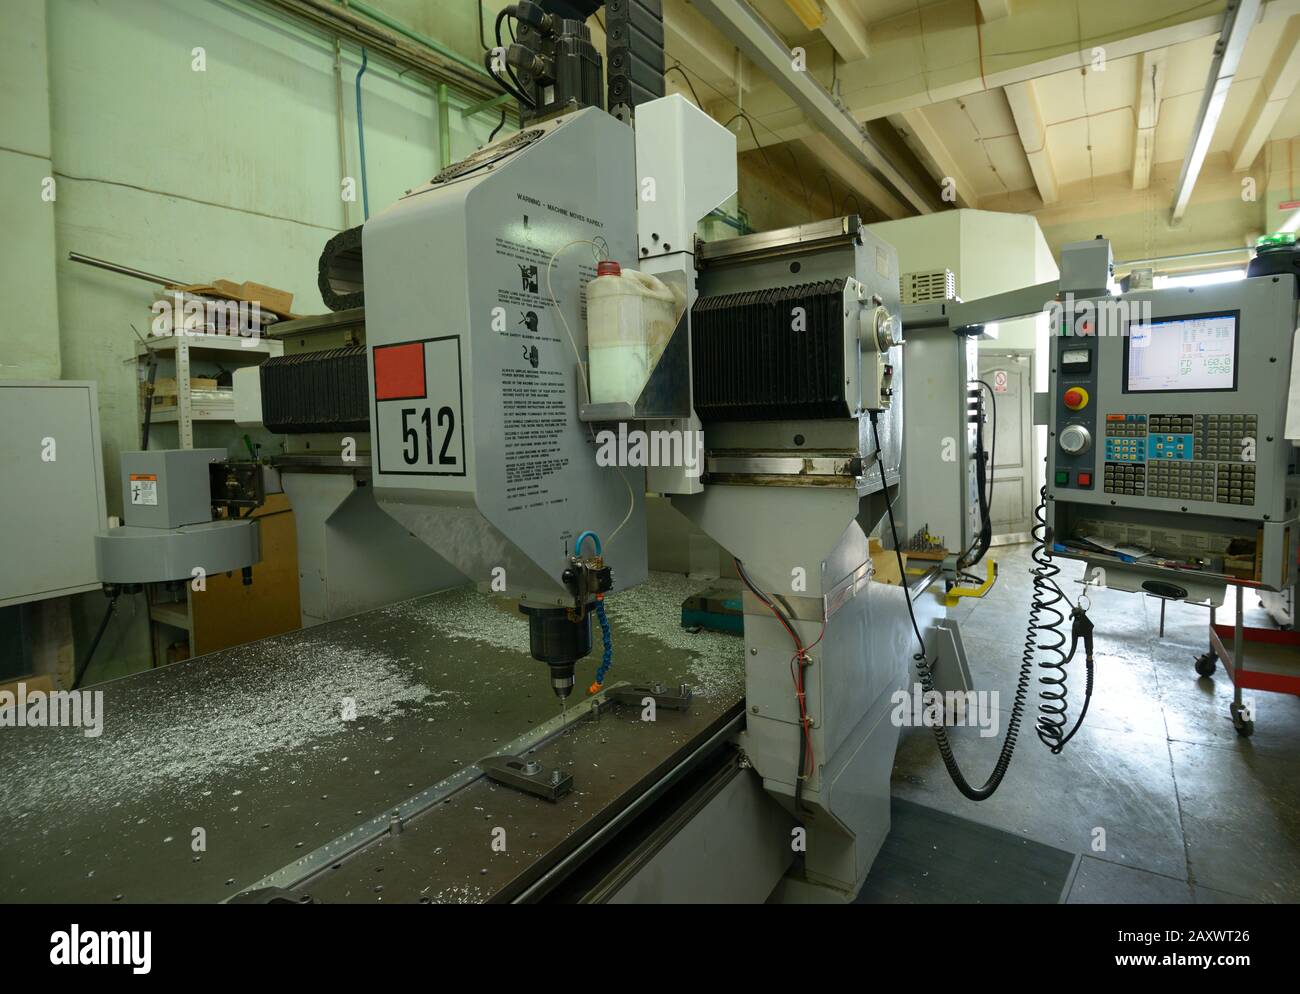 Computer numerical control milling machine set for work, drill boring hole  in a metal piece, close up Stock Photo - Alamy